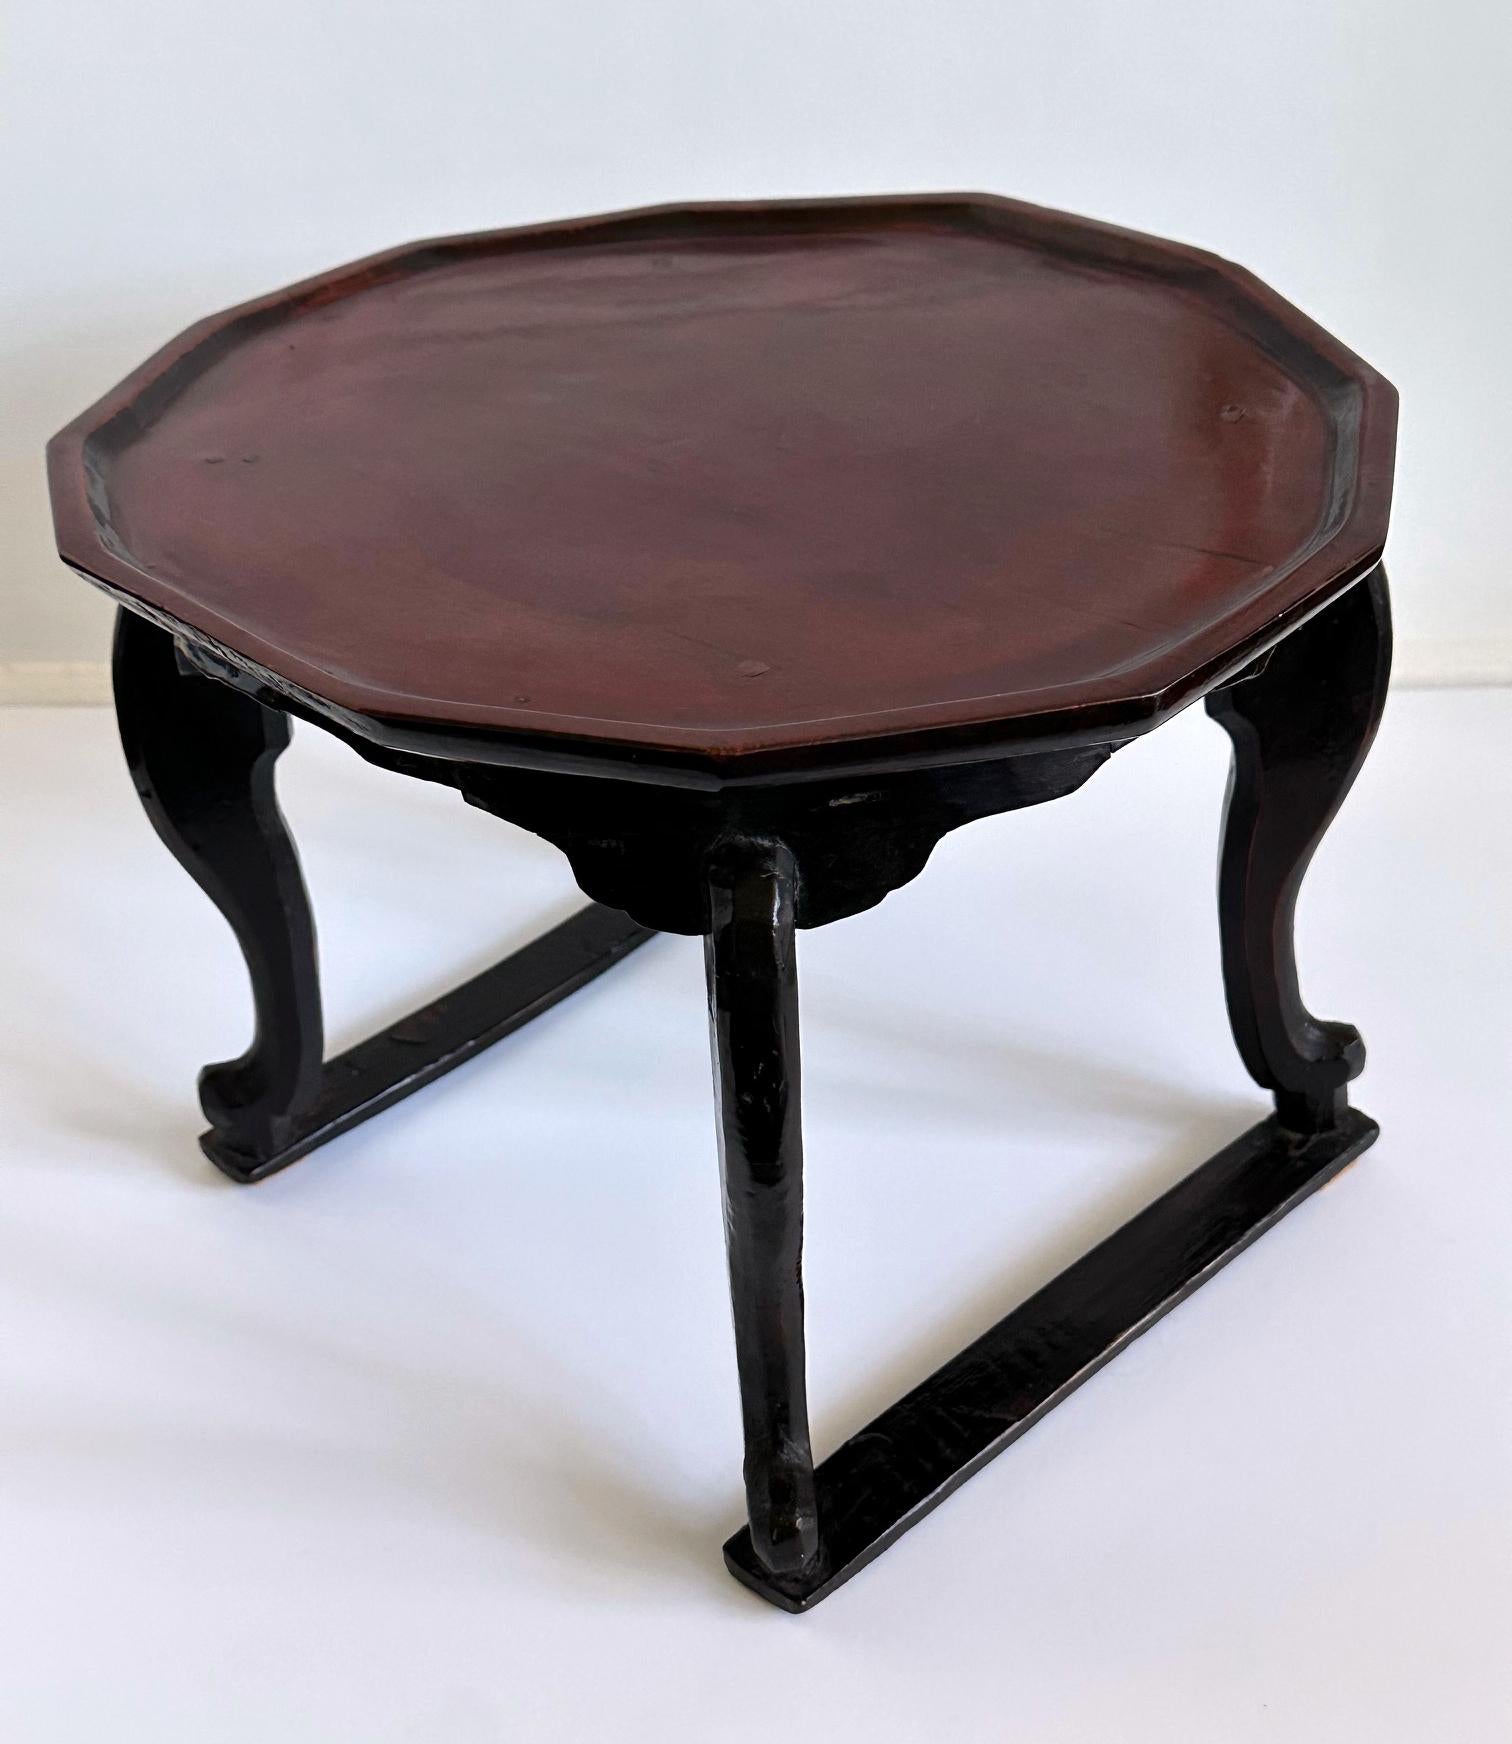 Lacquered Antique Korean Lacquer Wood Soban Table Joseon Period For Sale